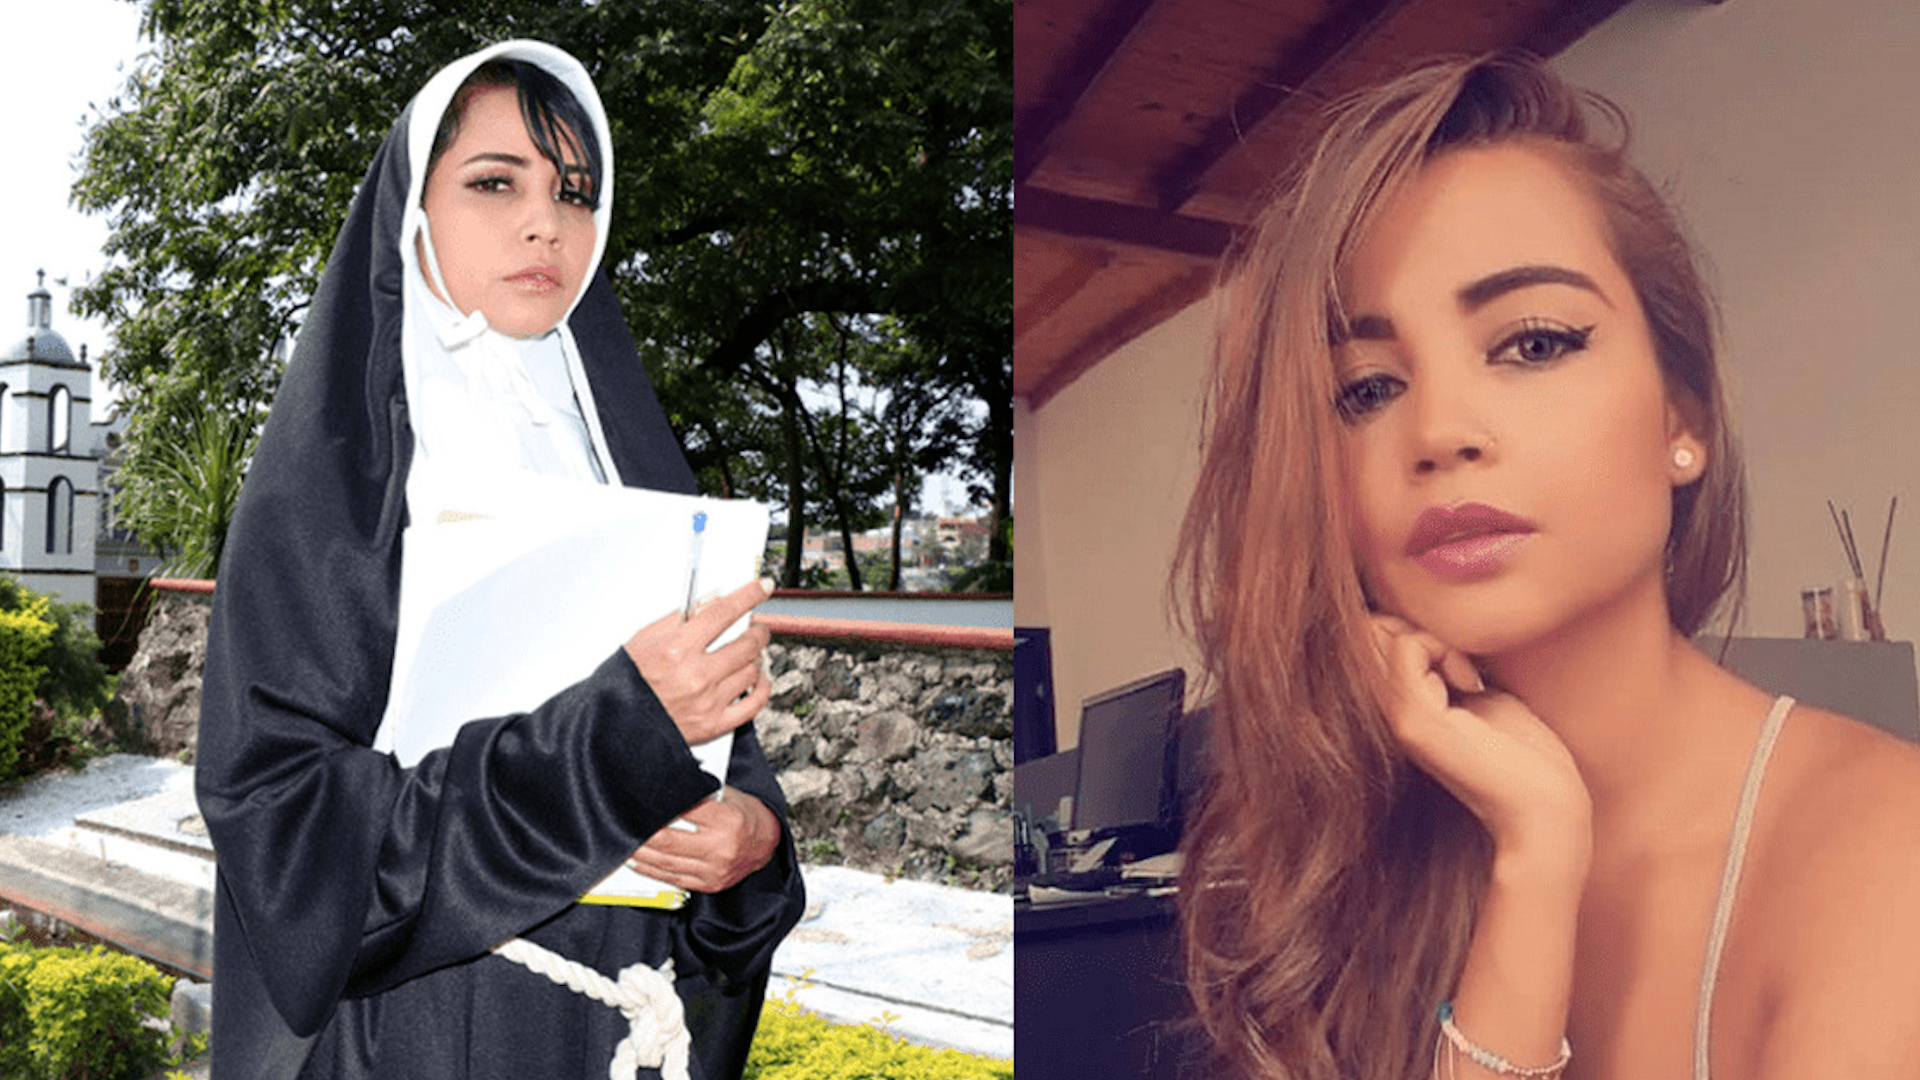 Youngest Looking Porn Star Ever - Yudi Pineda, the nun that left the convent for porn | Marca